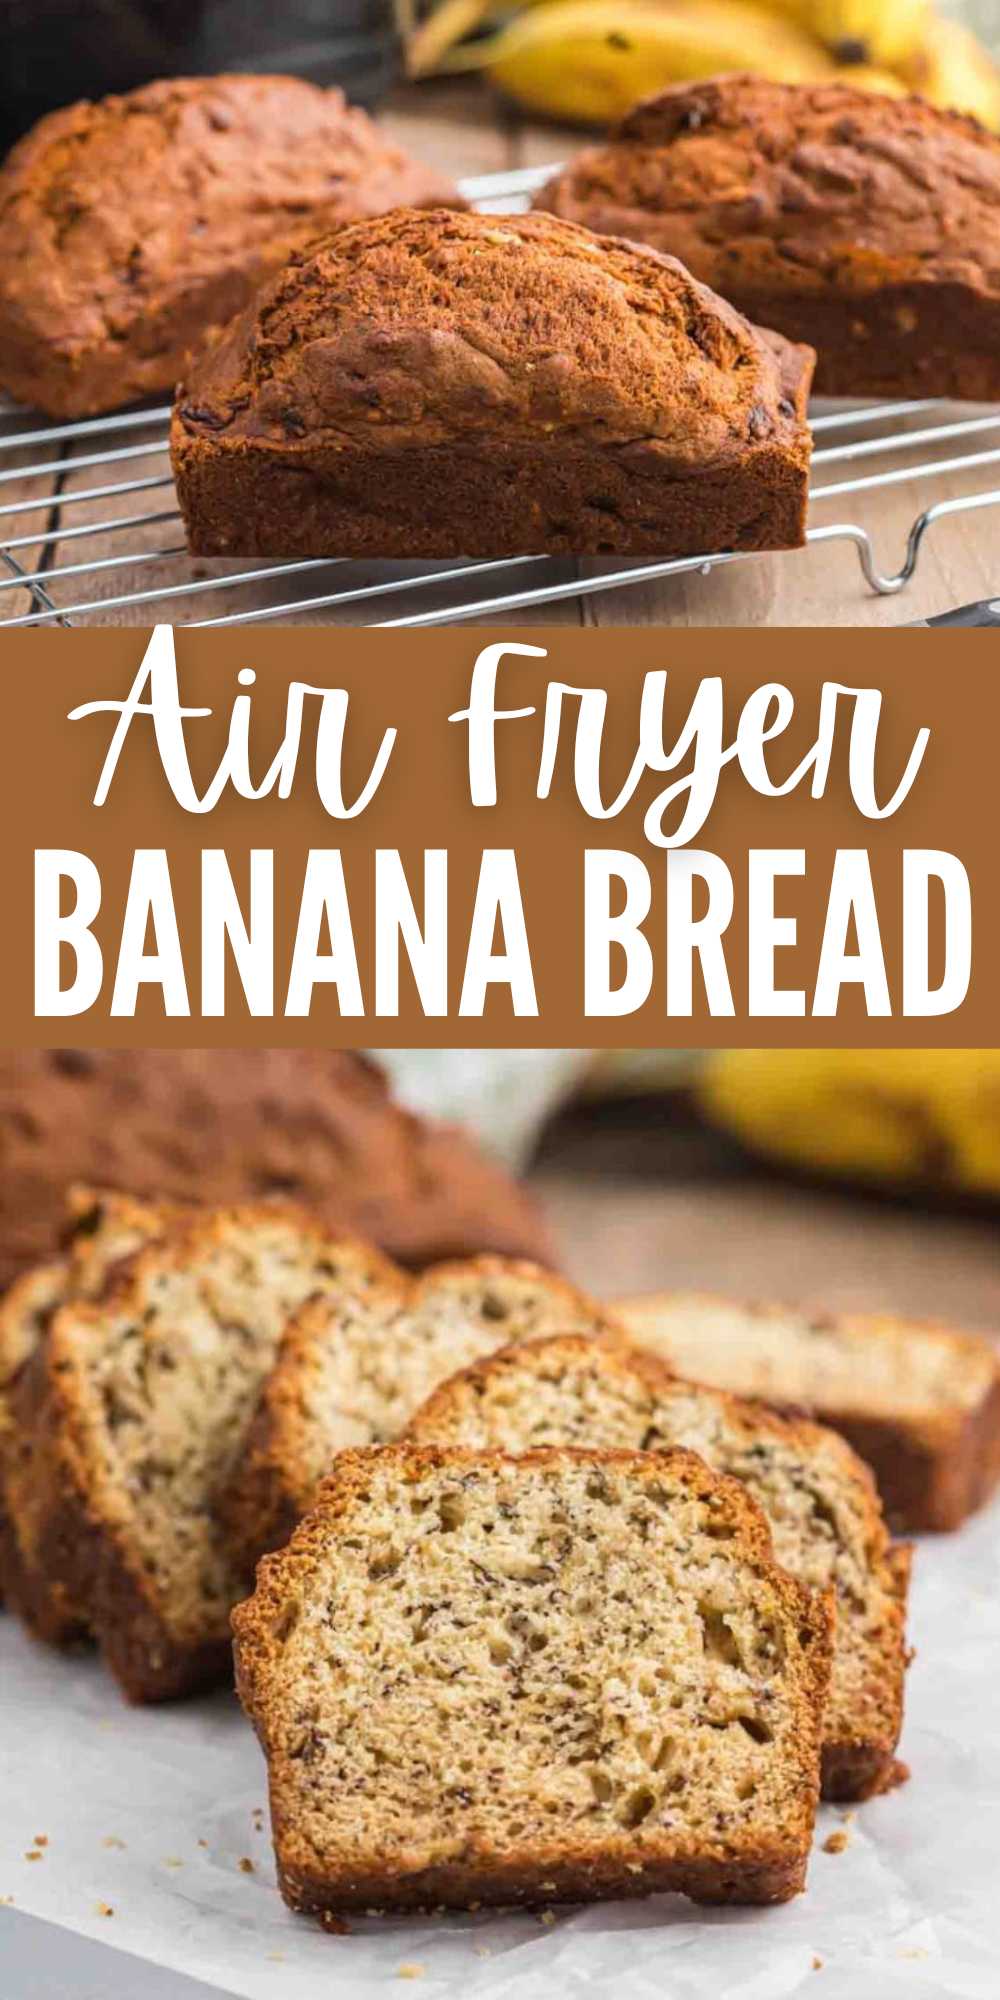 Air Fryer Banana Bread is a delicious and easy way to make your favorite banana bread. This mini banana bread recipe is loaded with flavor. There are many substitutions or add-ins to make this bread but this simple banana bread recipe can't be beat. Slice the bread and have for breakfast or an afternoon snack. #eatingonadime #airfryerbananabread #airfryerrecipes #bananabread